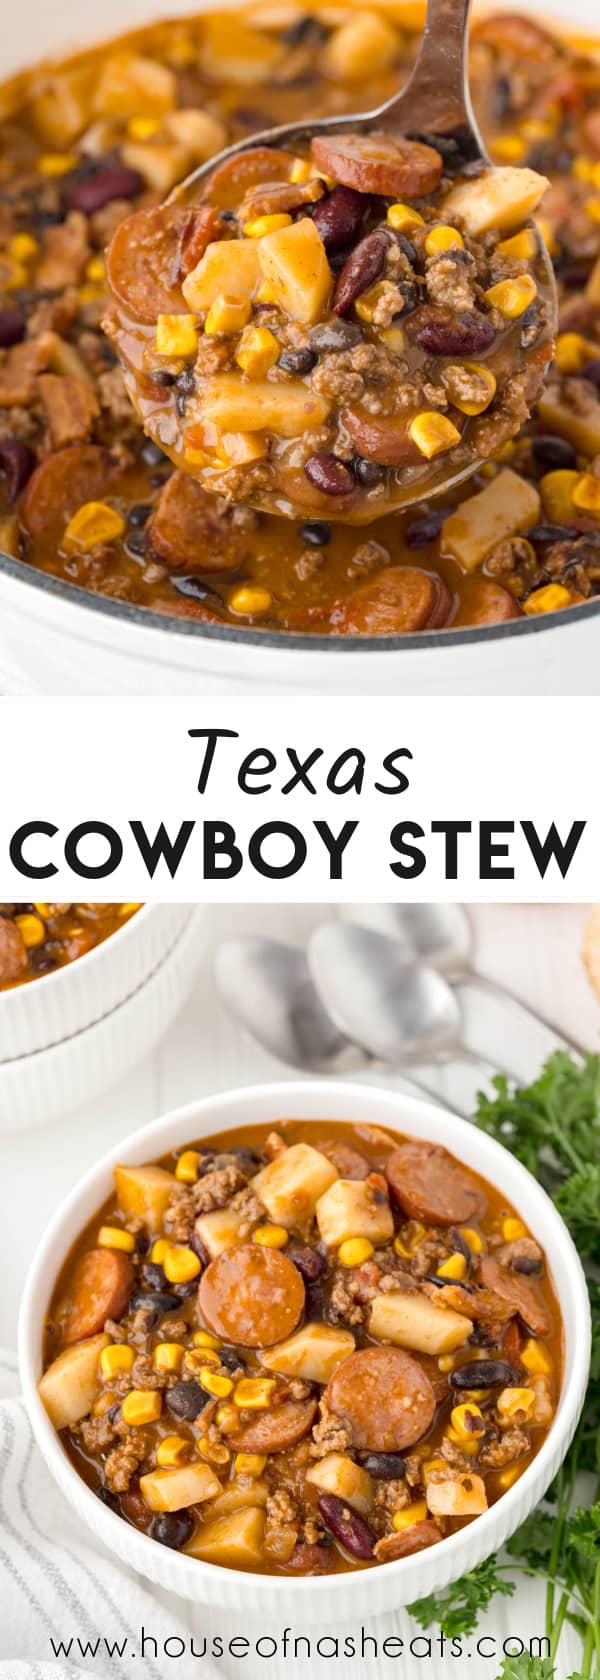 A collage of images of Texas cowboy stew with text overlay.